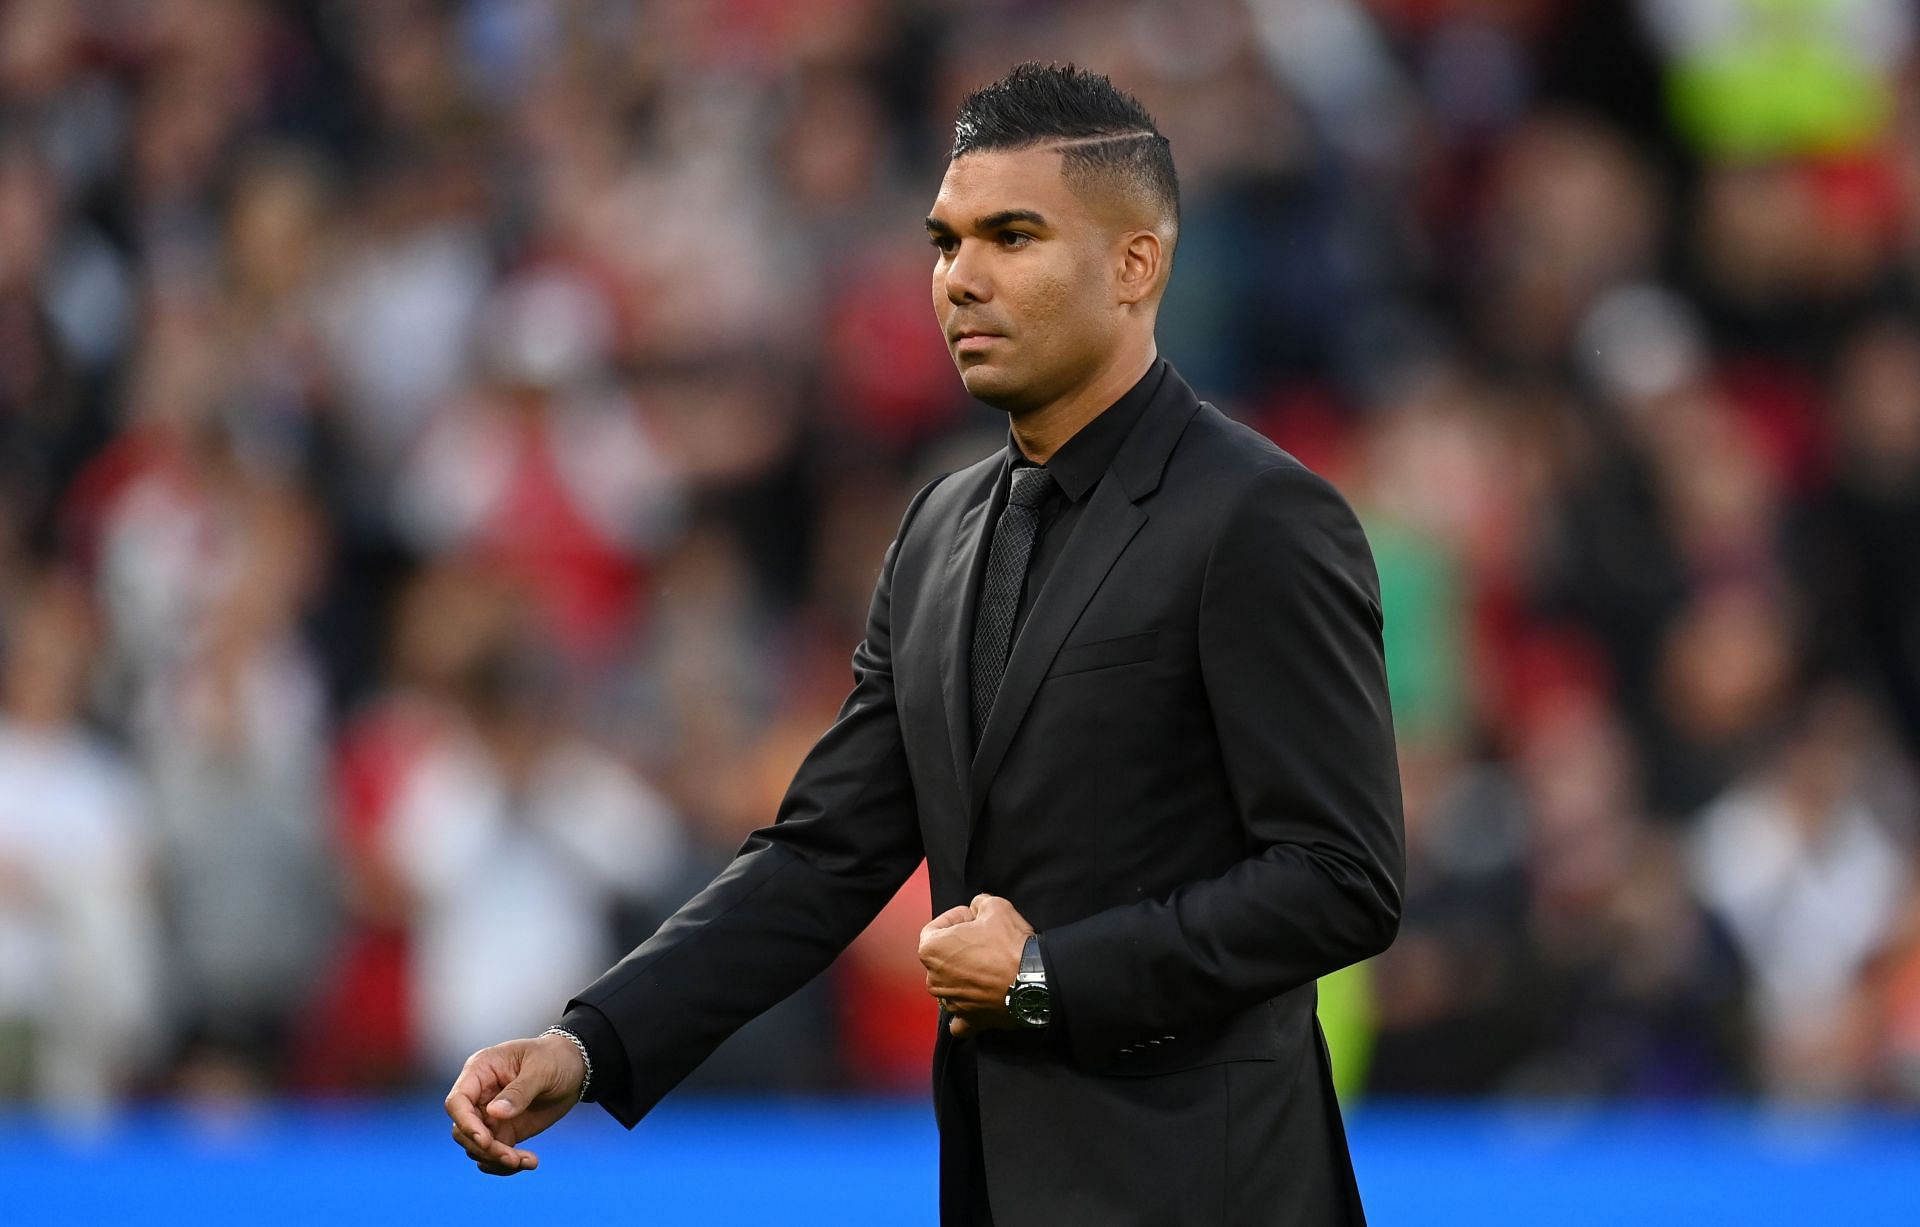 Casemiro is introduced to the Theatre of Dreams ahead of the game against Liverpool FC - Premier League